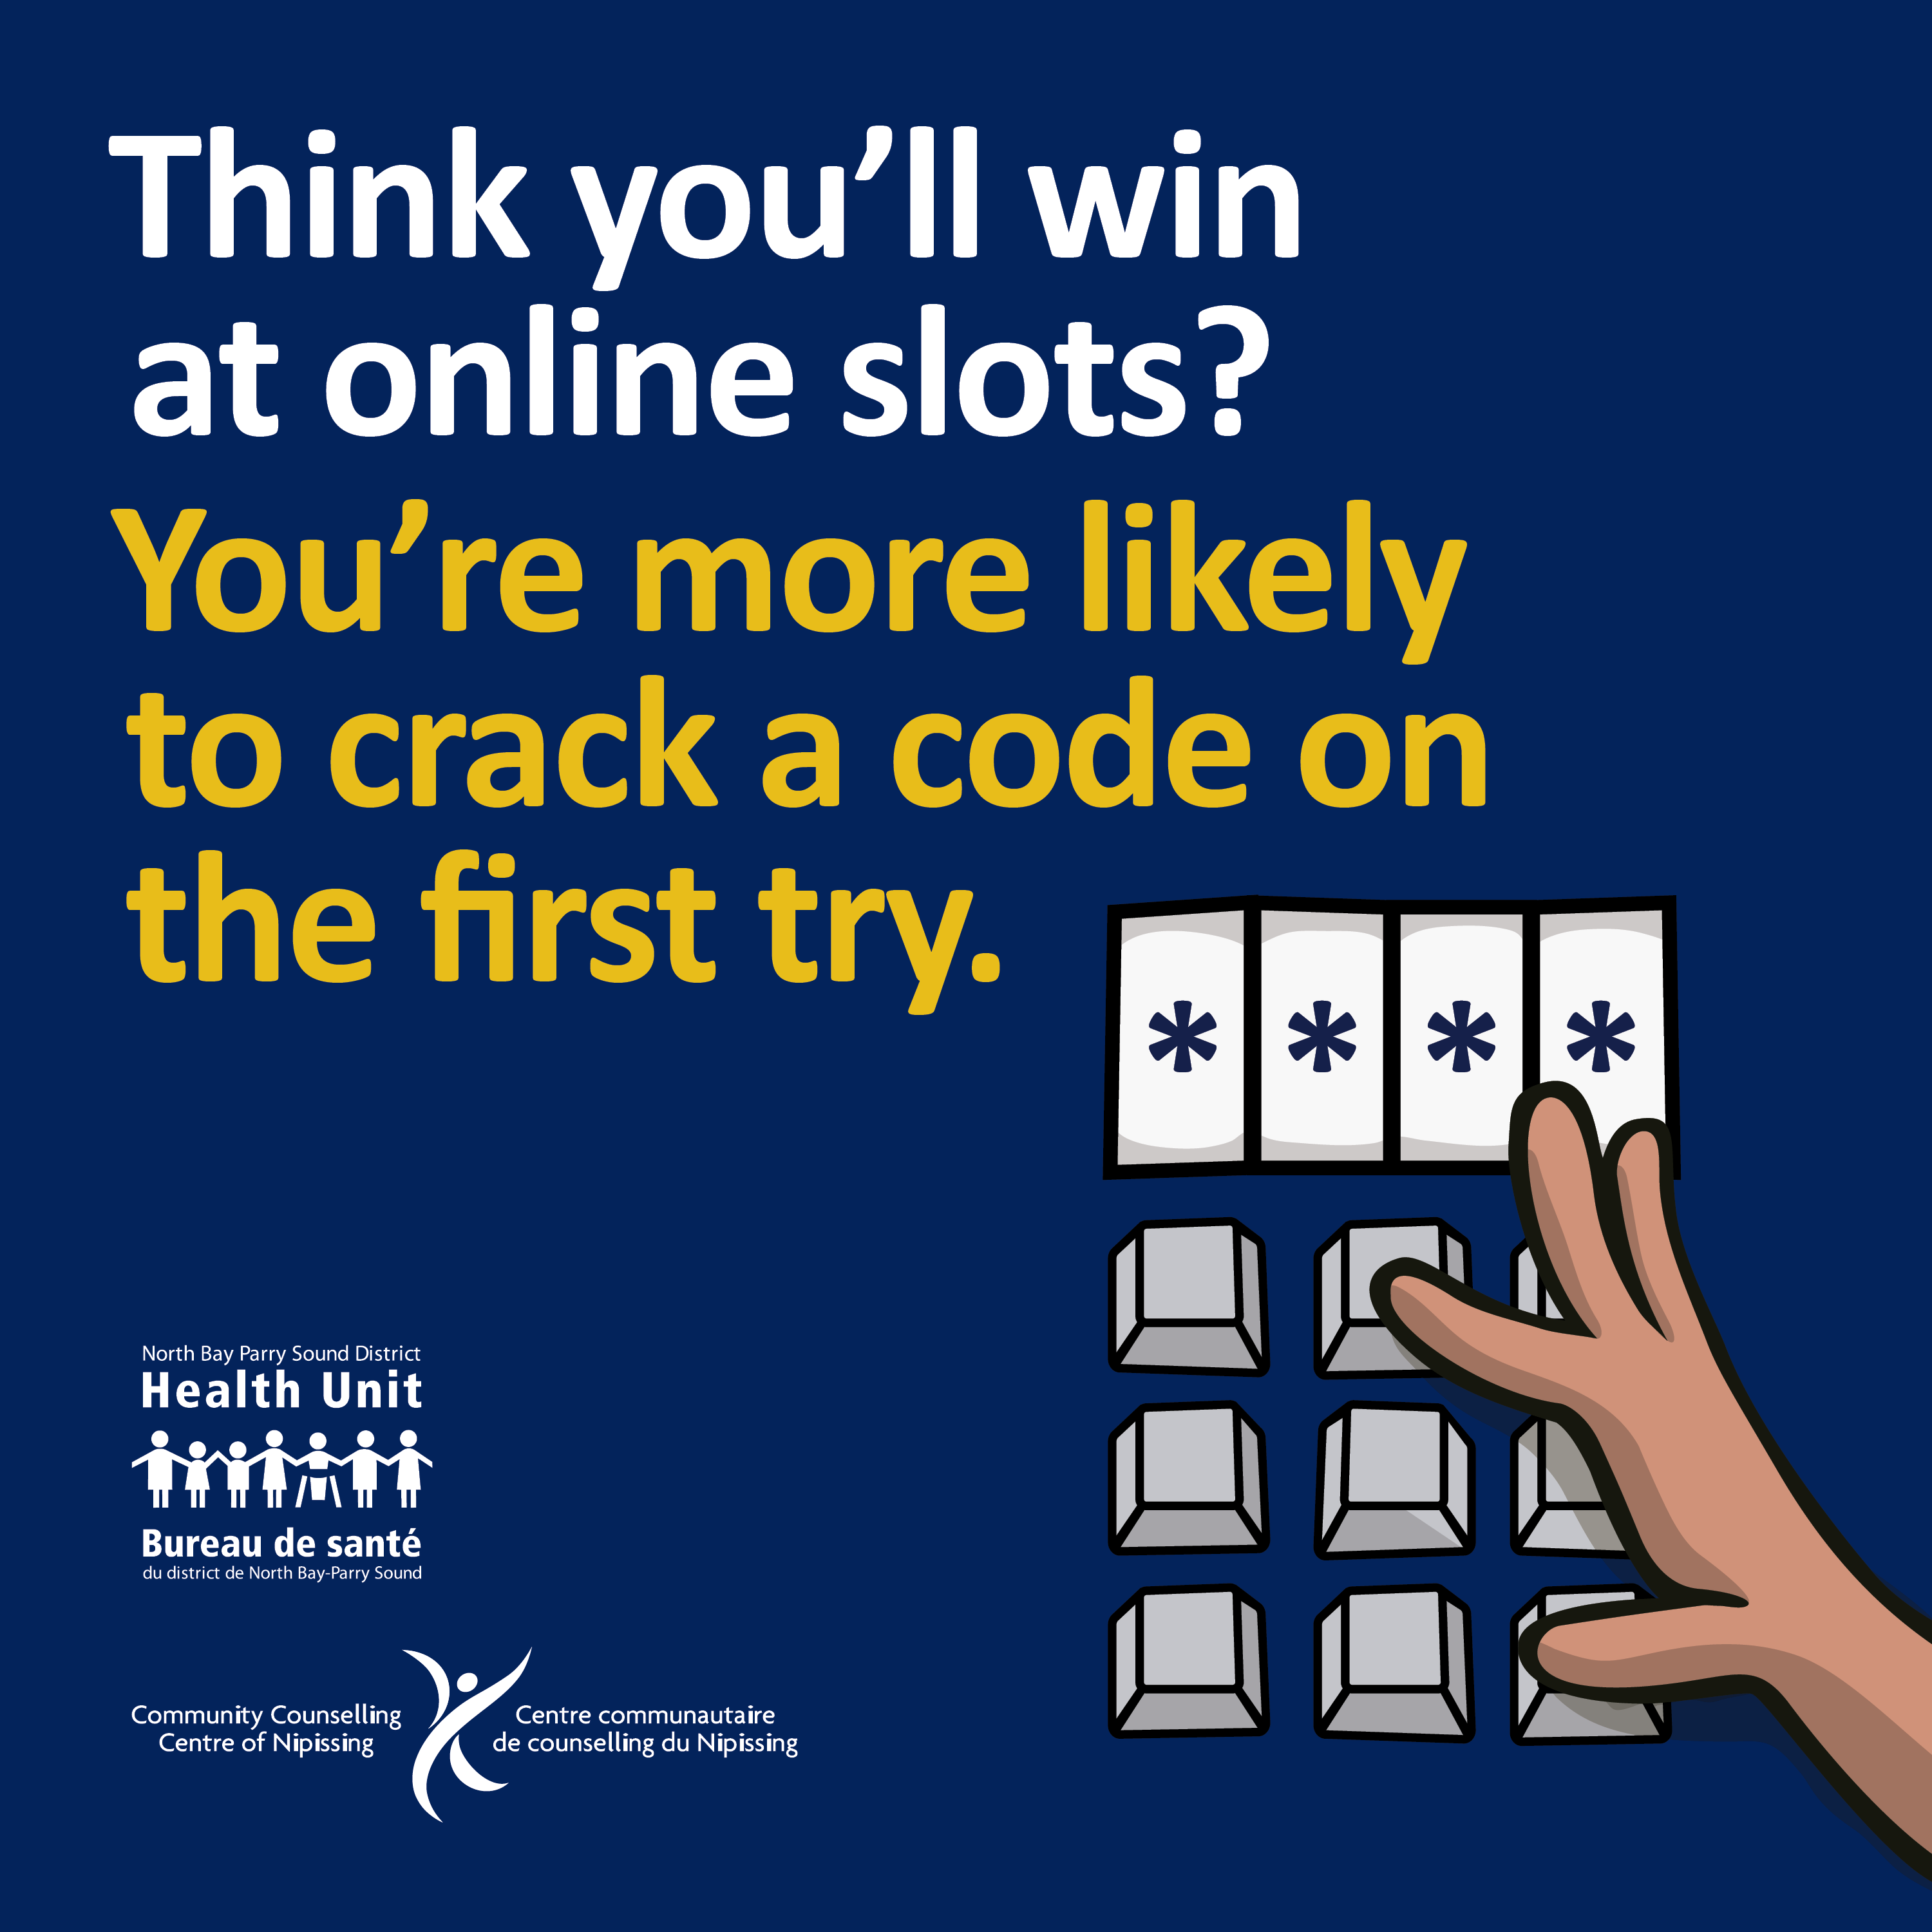 • Think you’ll win at online slots? You’re more likely to crack a code on the first try. 